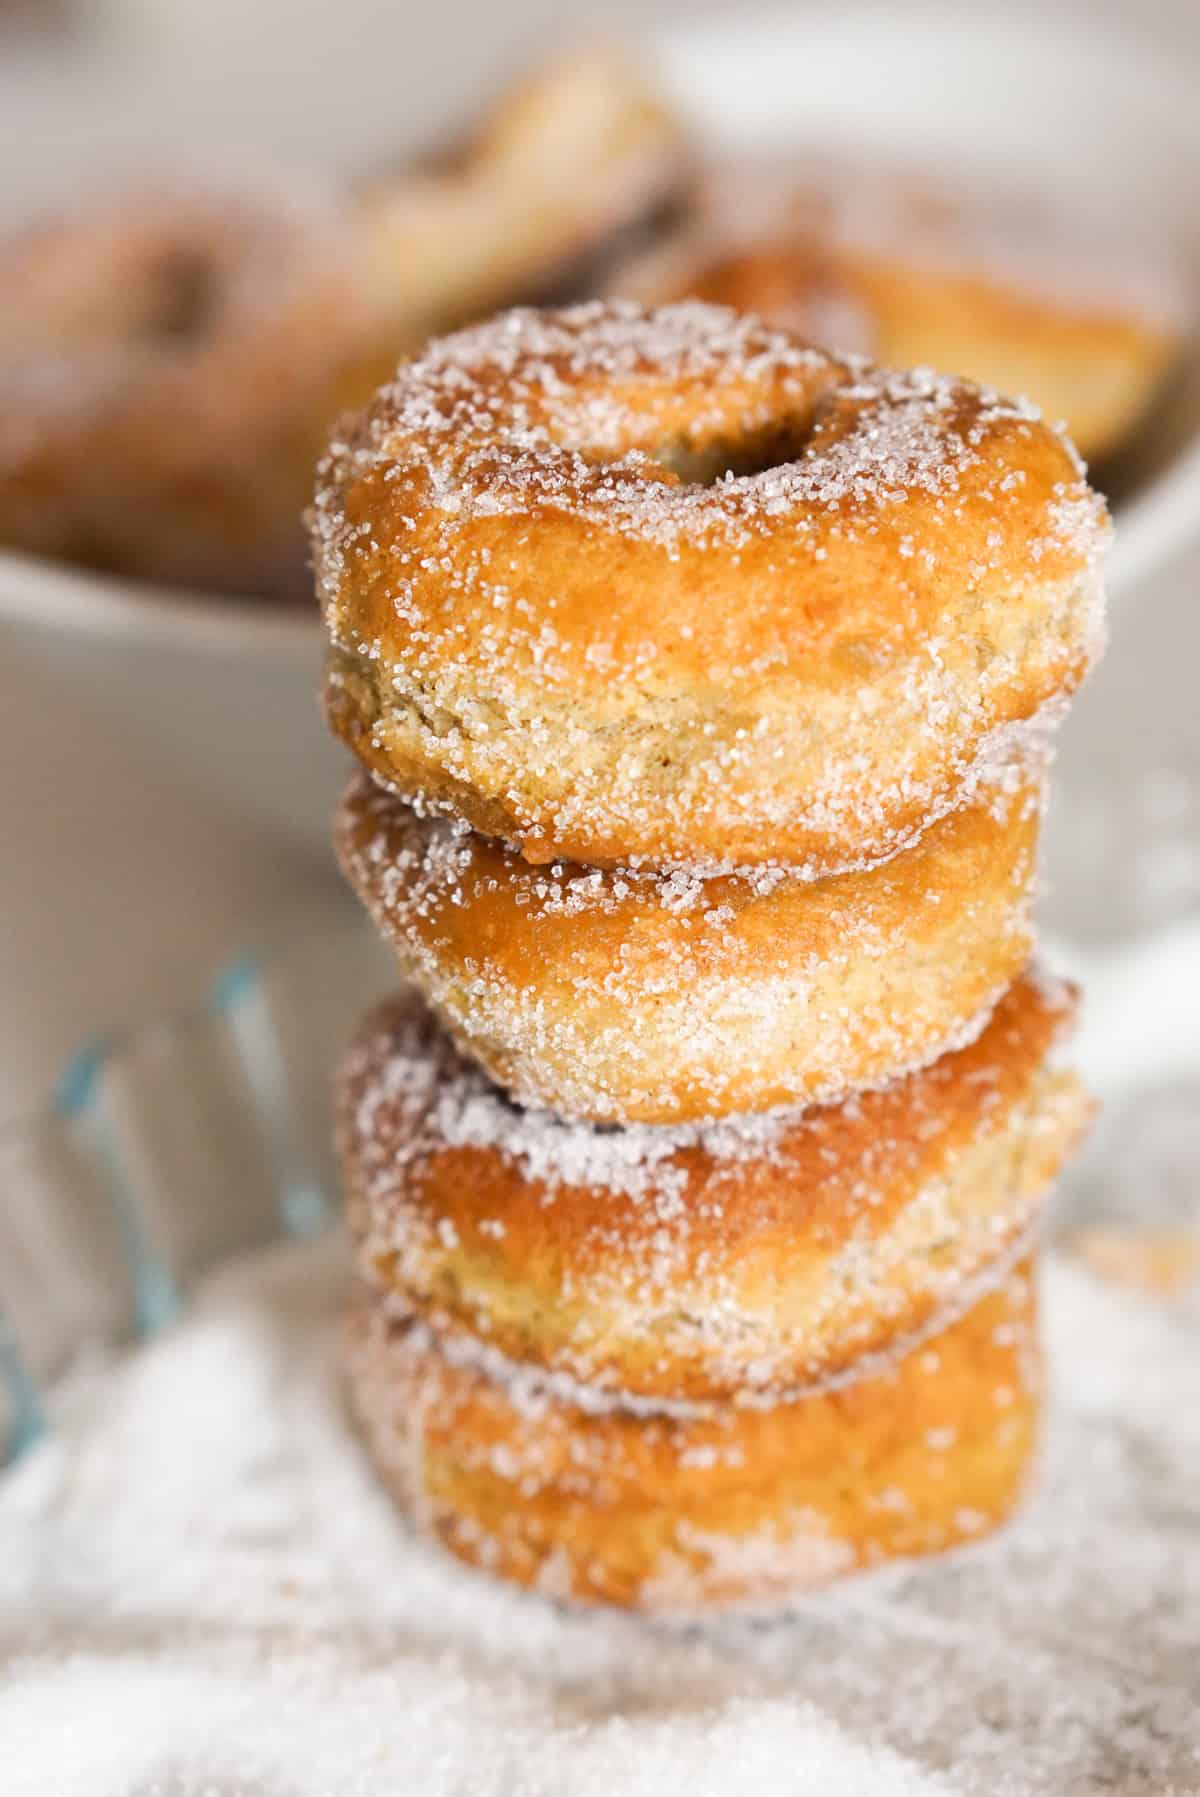 A stacked tower of four sugar covered fried donuts.